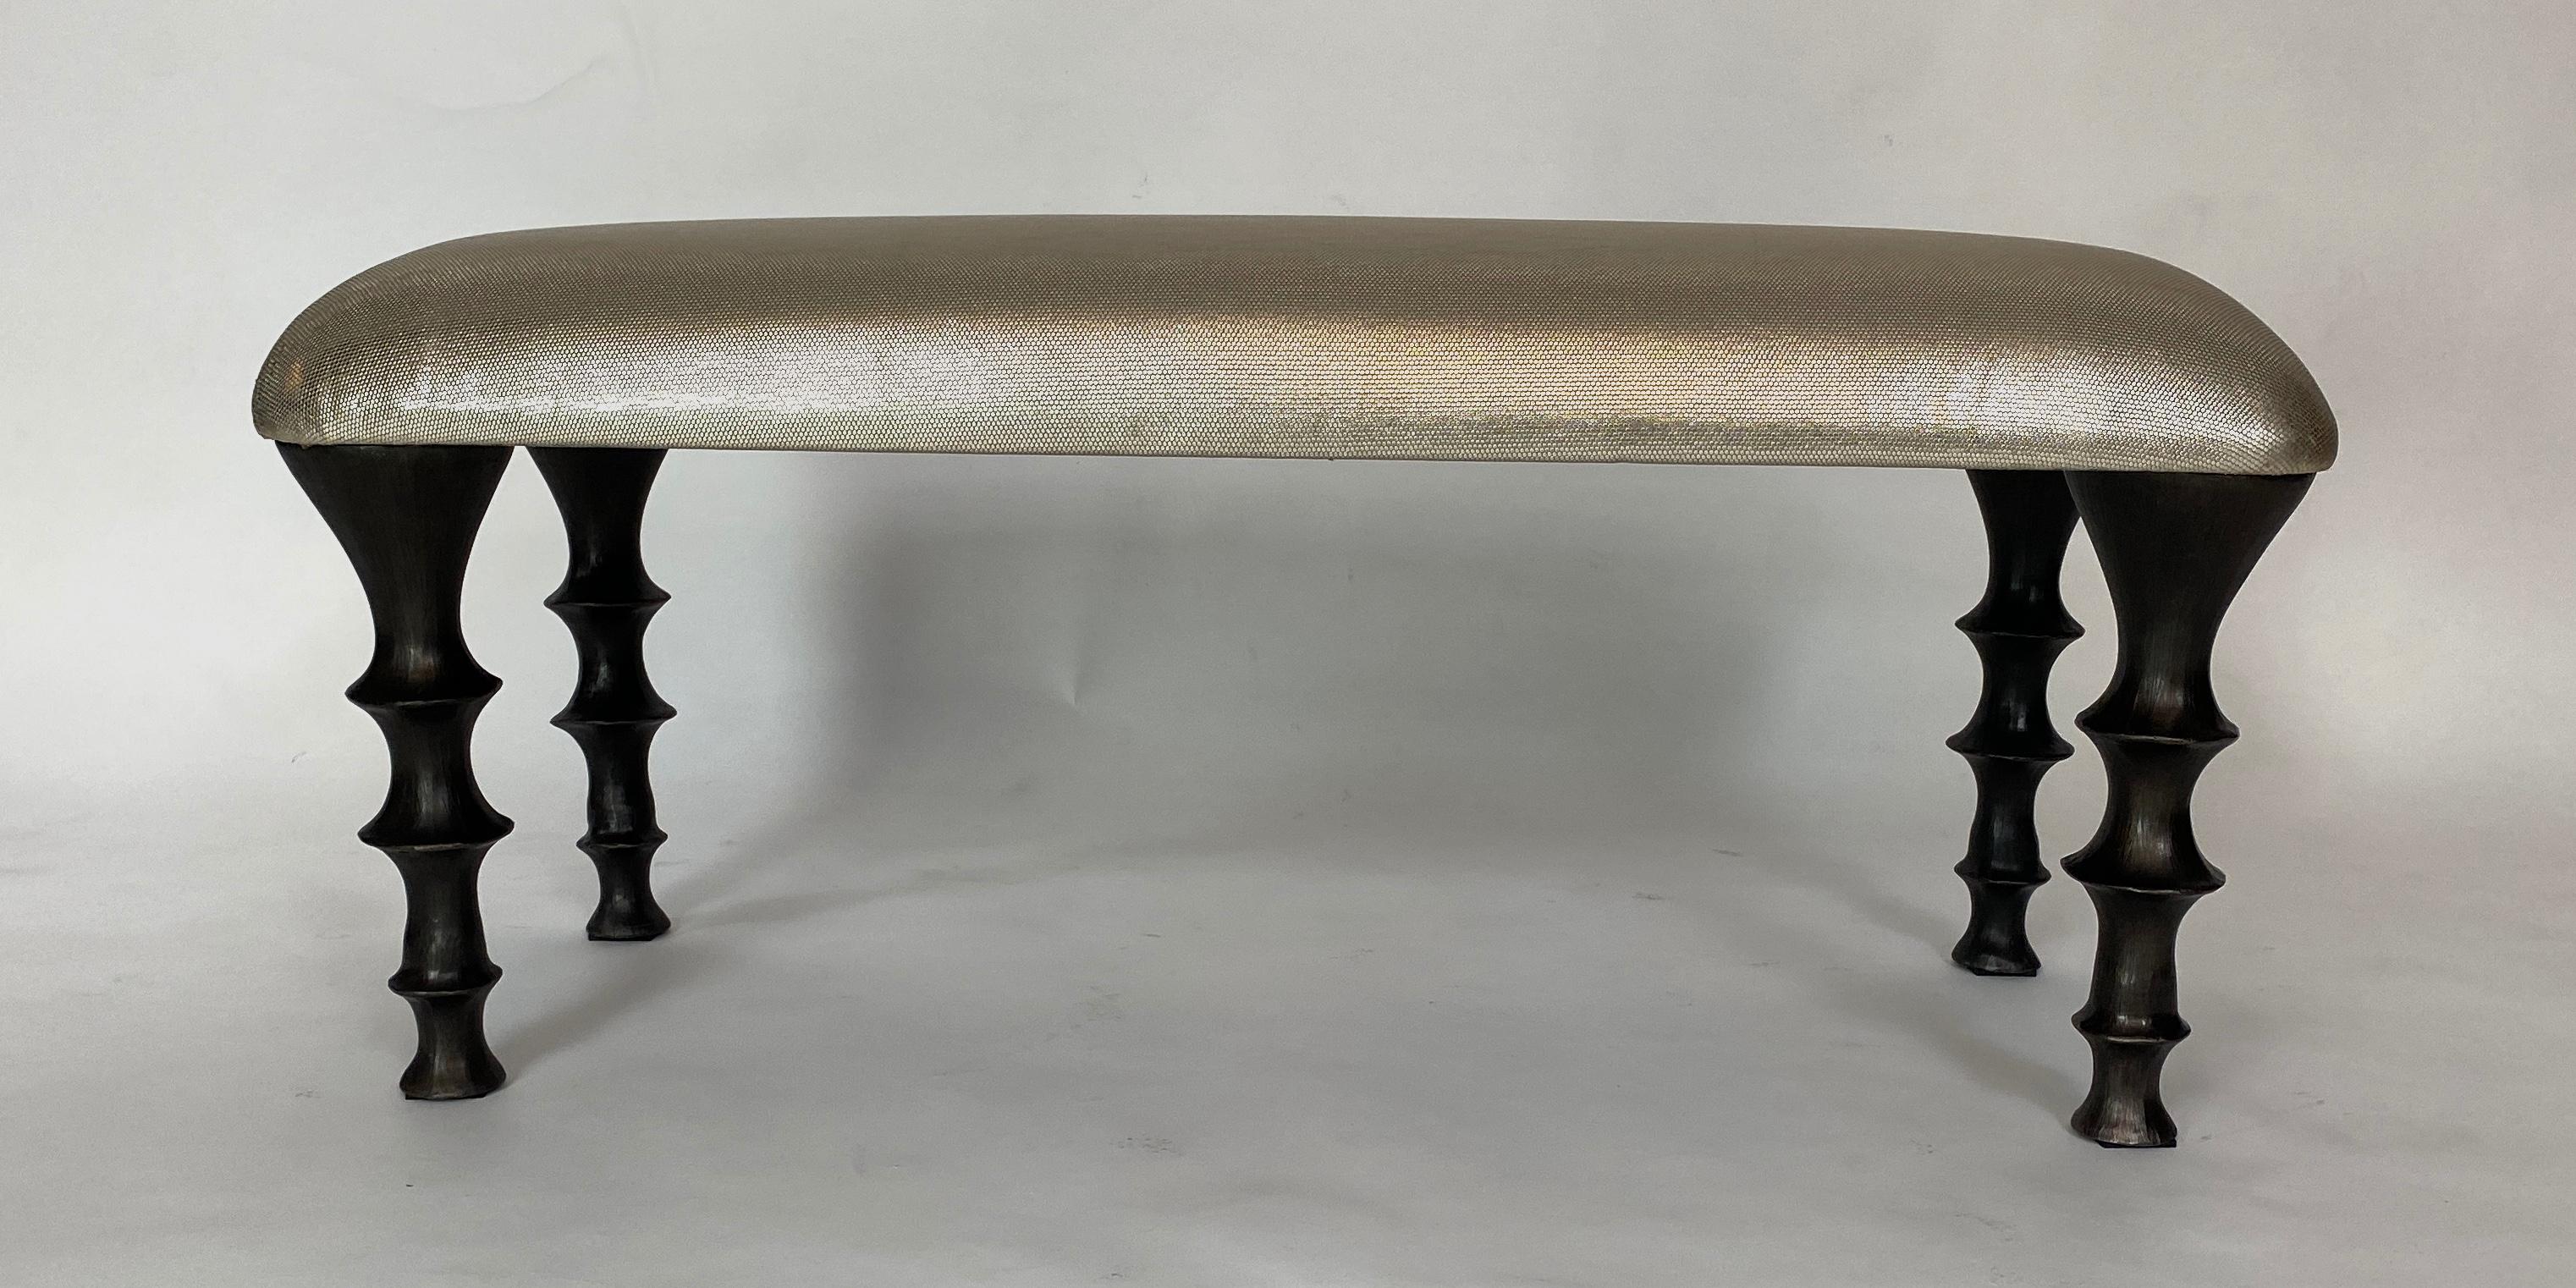 Versatile bench with cast silicon bronze legs with an embossed metallic cowhide cushion. The design of the legs have an organic texture. This bench will make a powerful statement in your
interior. Bench can also be made custom in different size and